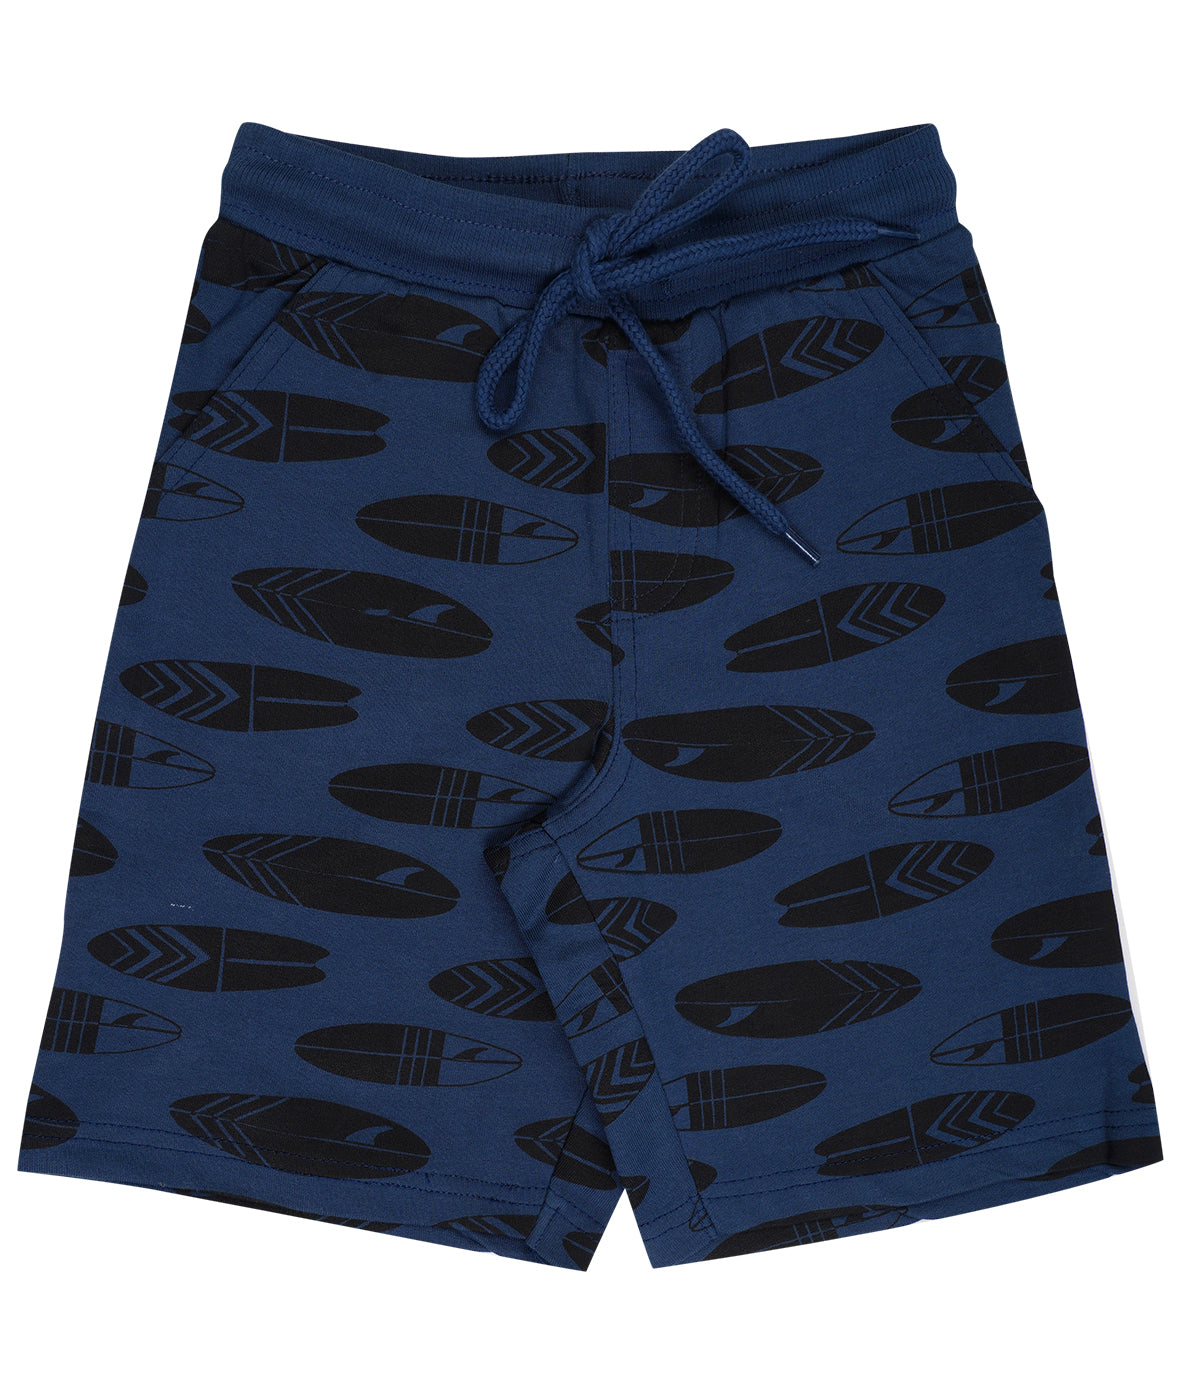 Yalzz Short For Boys Casual Printed Pure Cotton